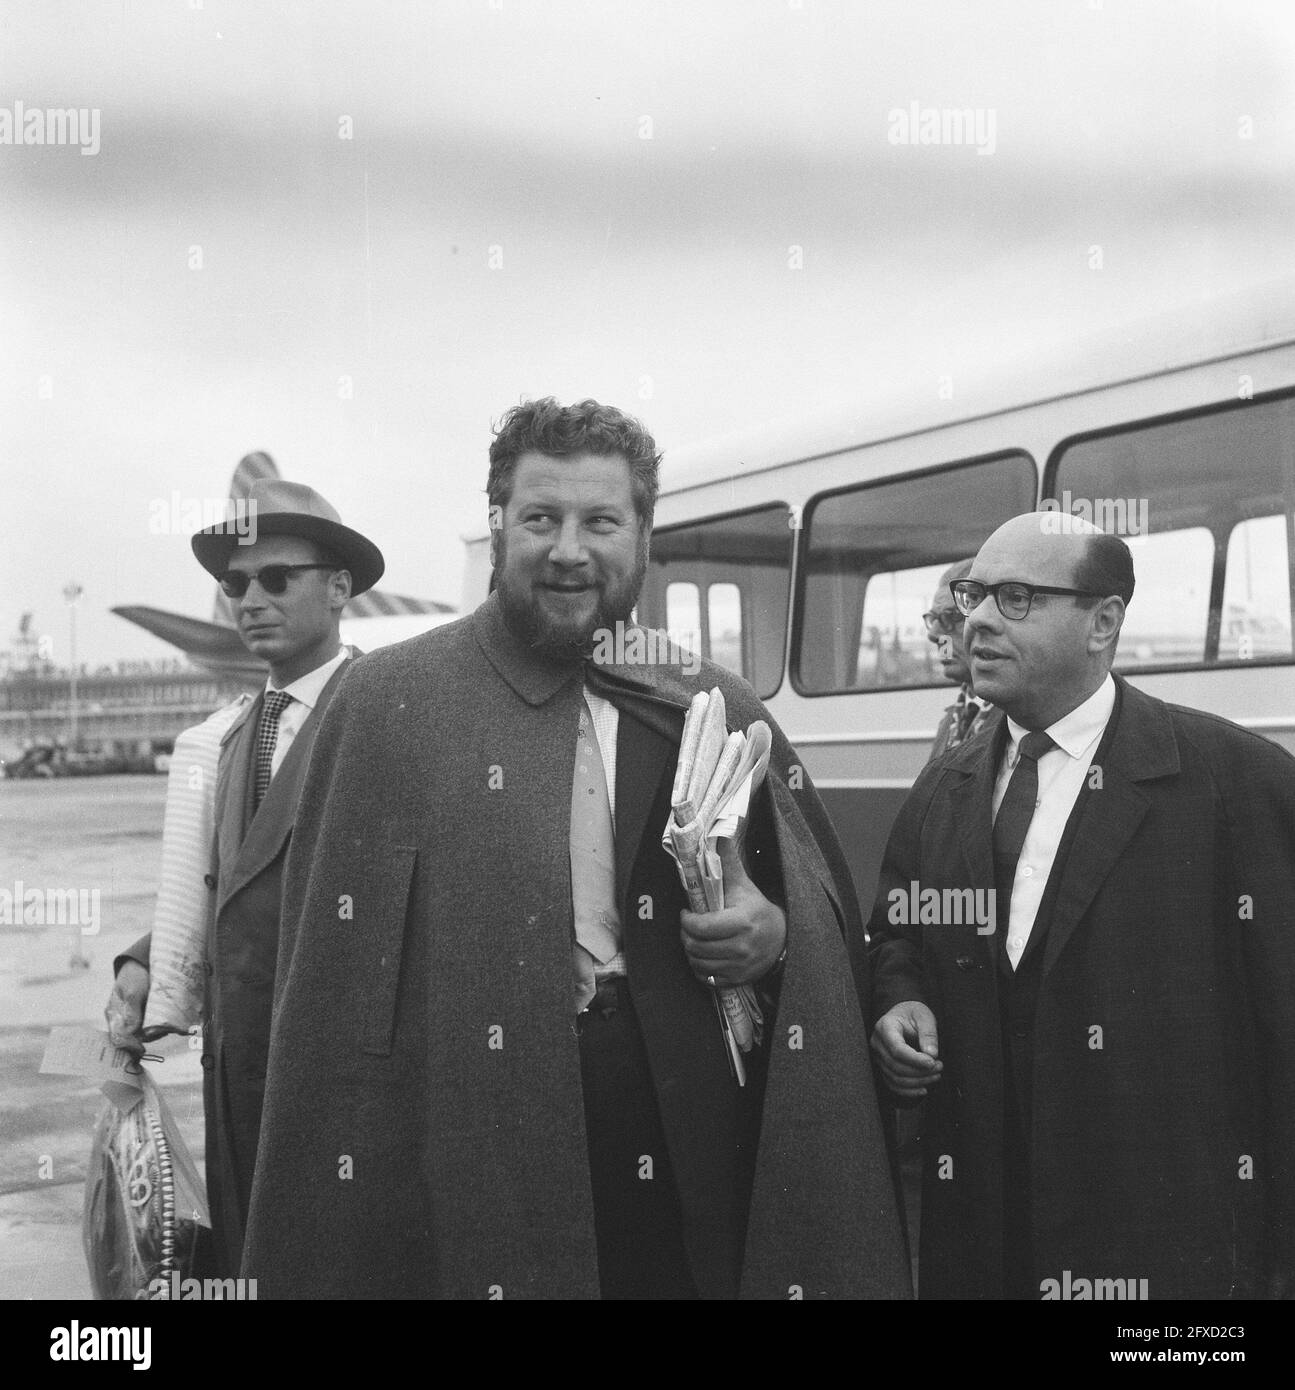 Peter Ustinov, English film director [next to him Simon van Collem], September 24, 1962, film directors, The Netherlands, 20th century press agency photo, news to remember, documentary, historic photography 1945-1990, visual stories, human history of the Twentieth Century, capturing moments in time Stock Photo